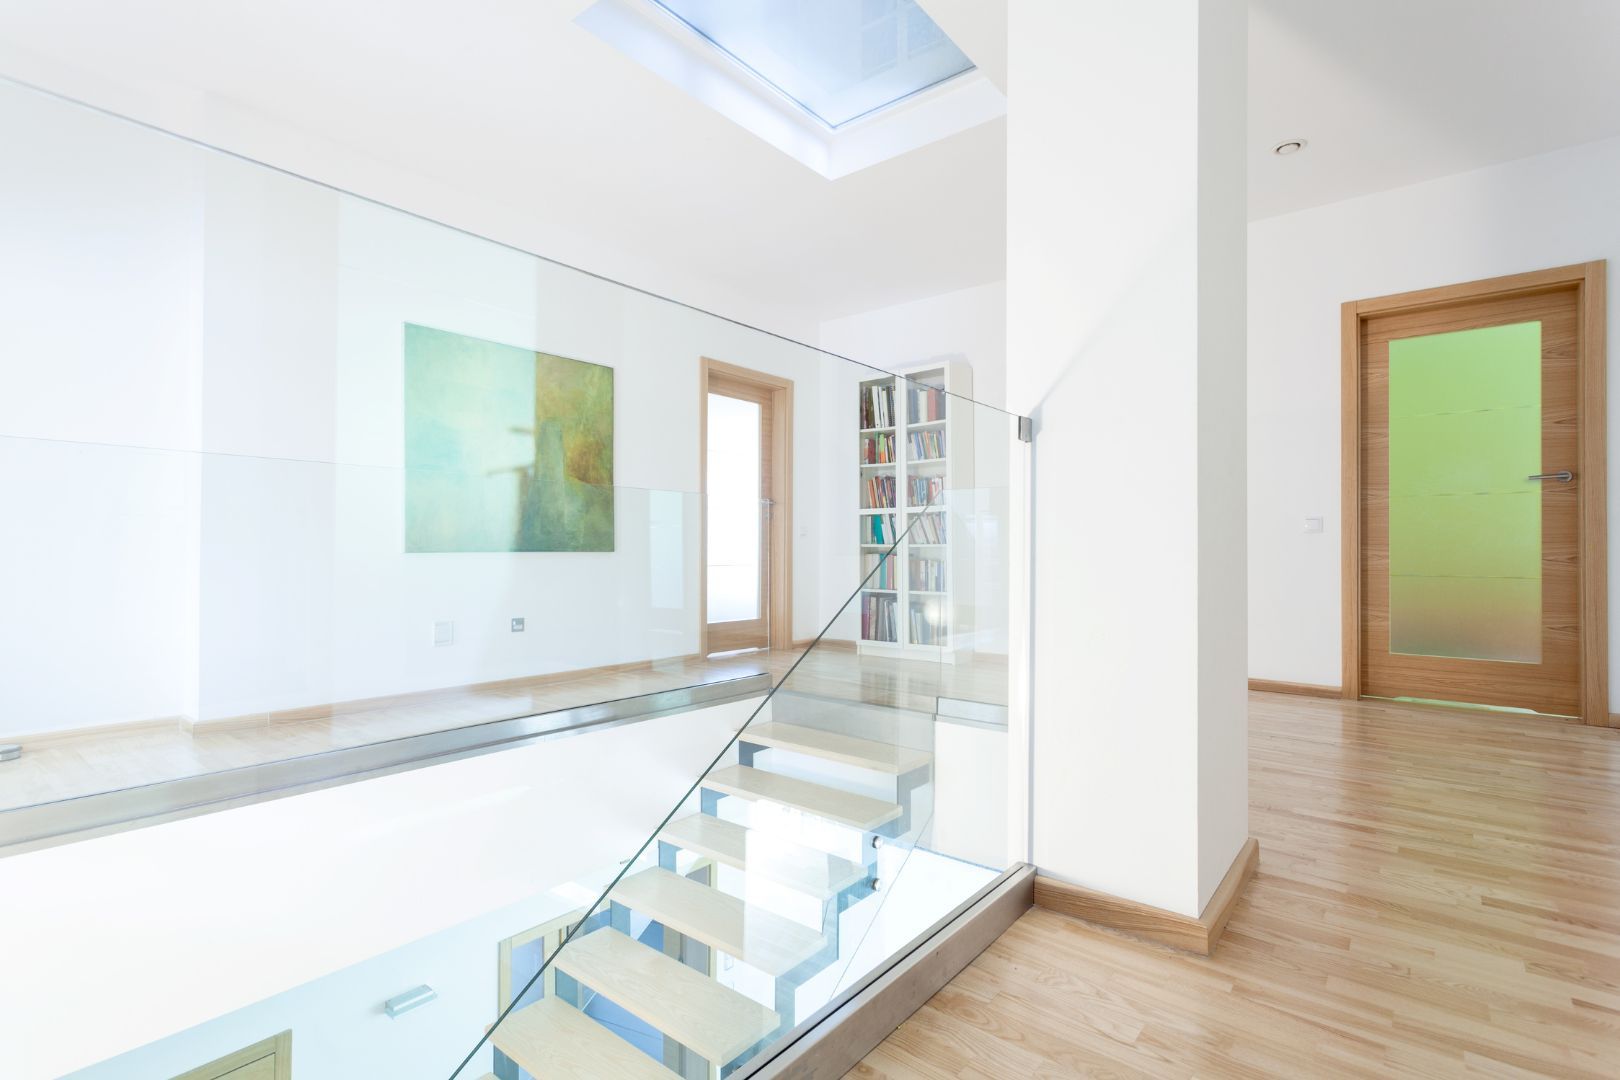 Glass staircase in a home with wooden floors and white painting on the walls and supporting posts.